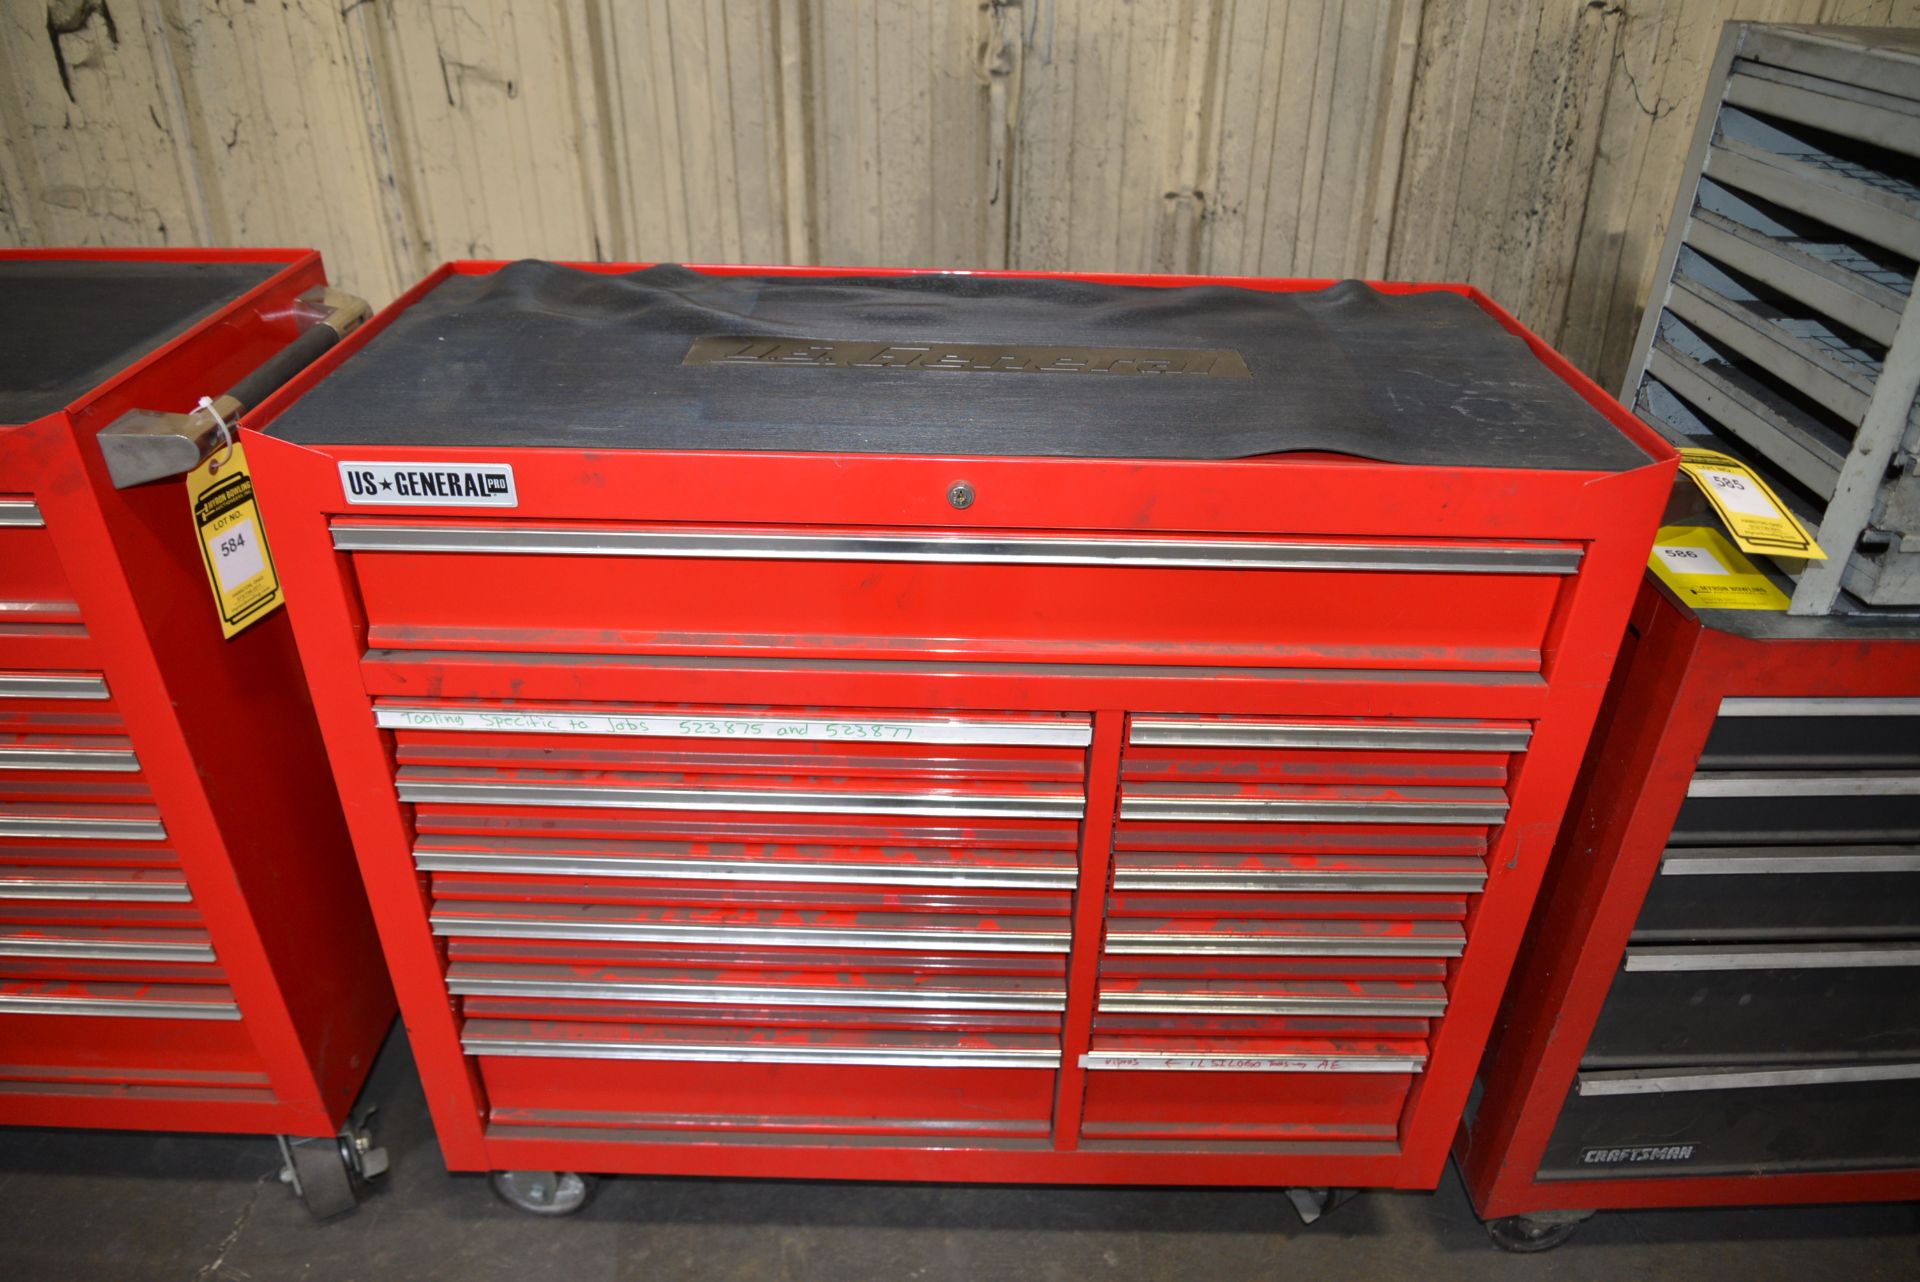 US GENERAL TOOL CHEST FULL OF AMADA TOOLING